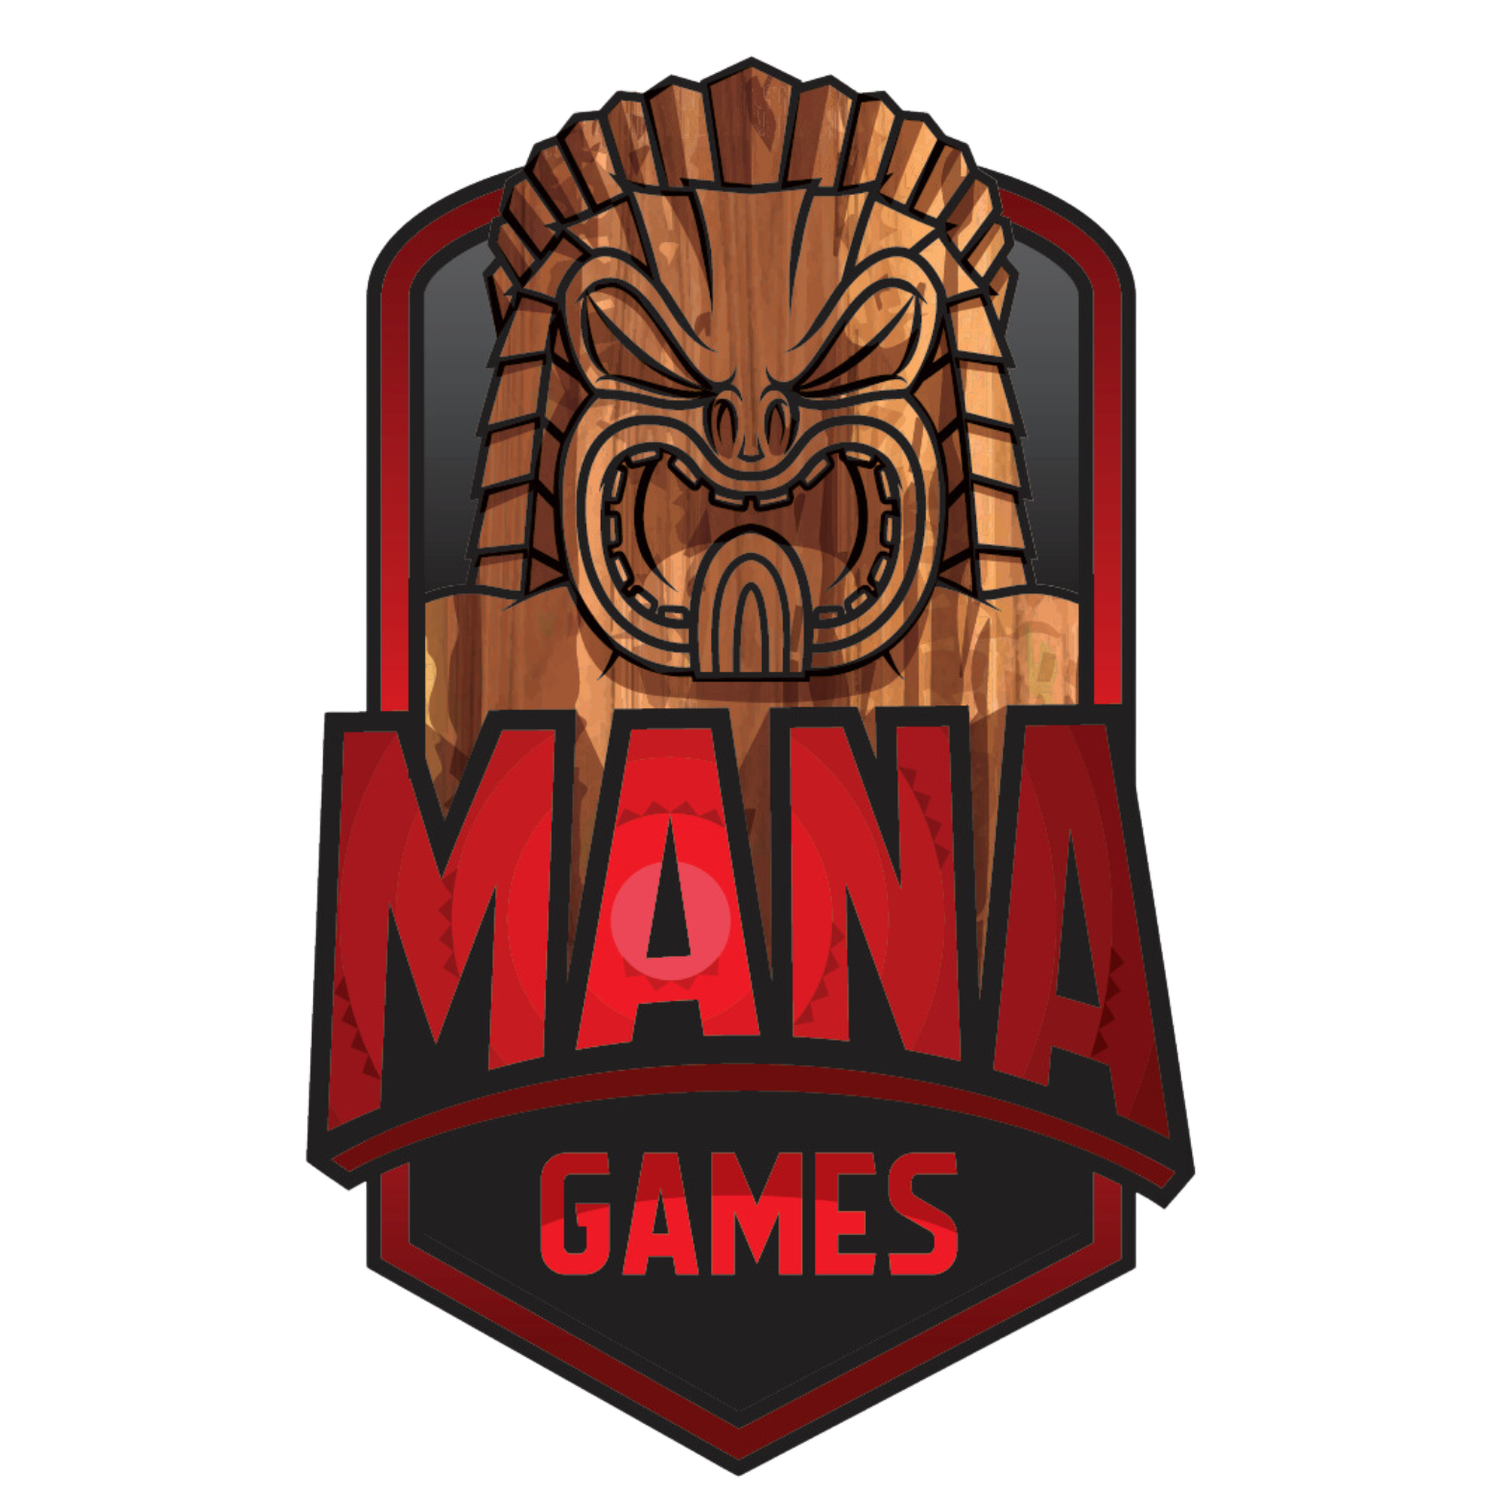 The Mana Games